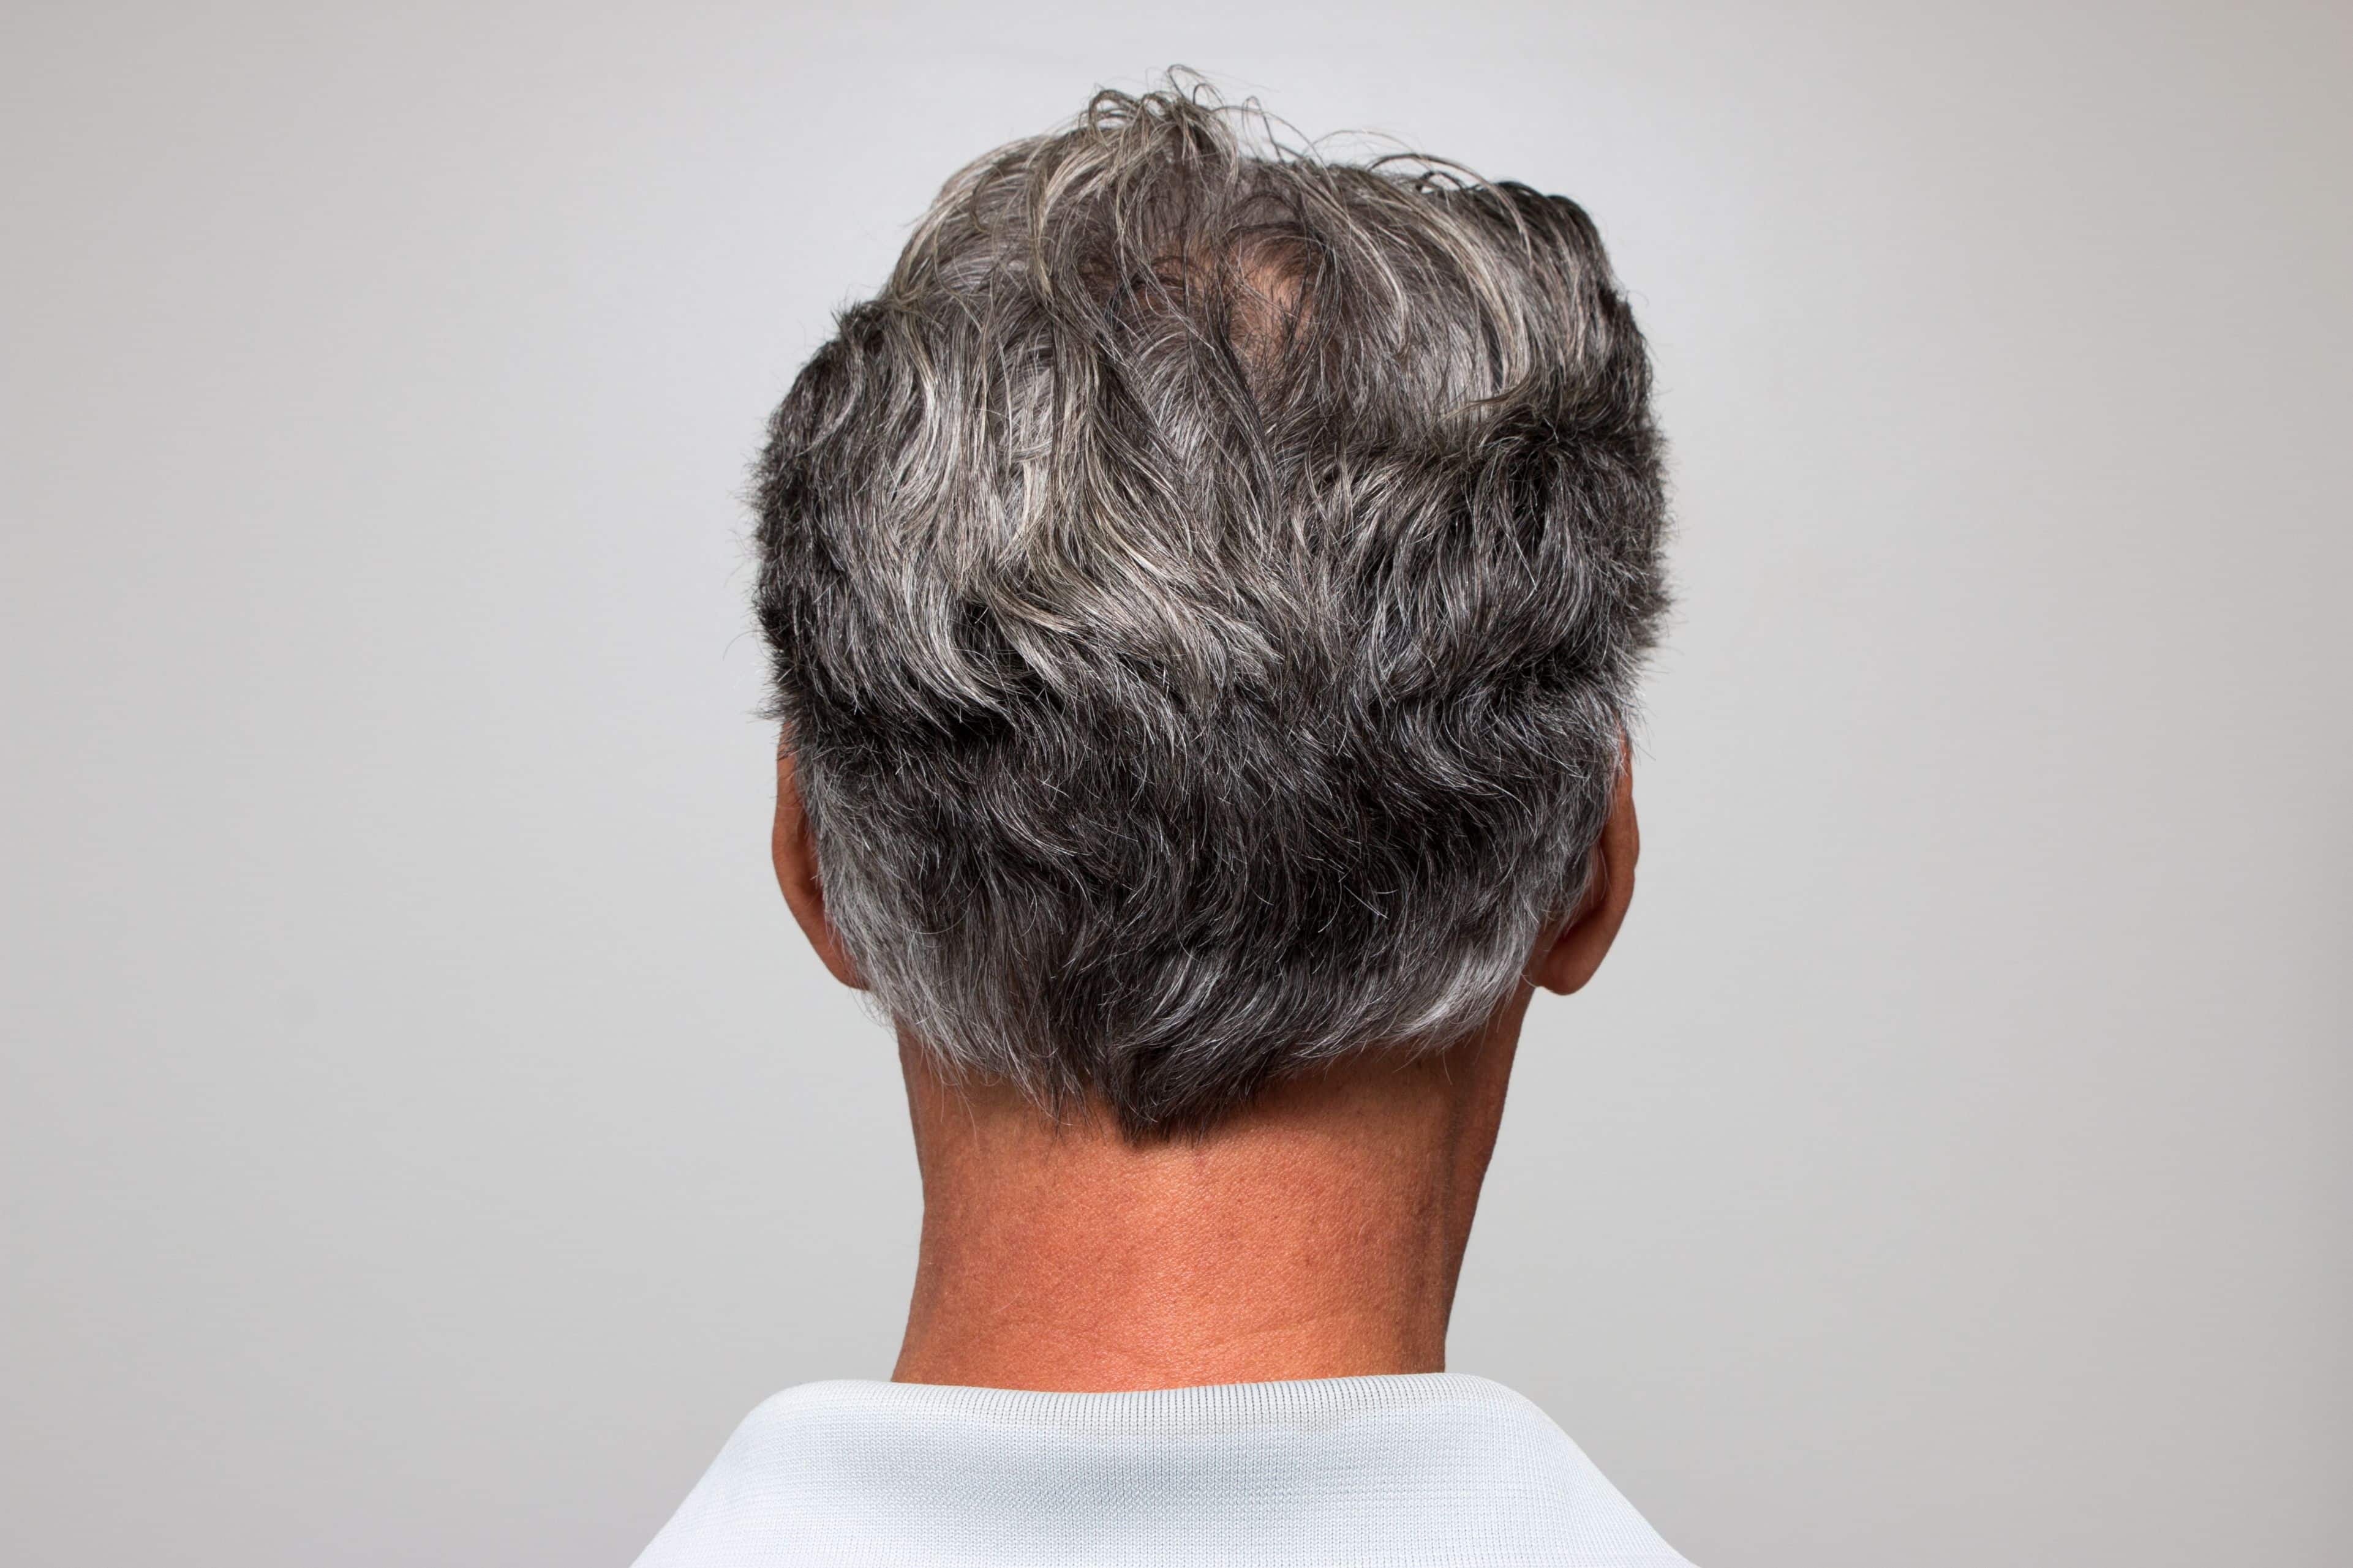 Mature man with salt and pepper hair starting to turn gray